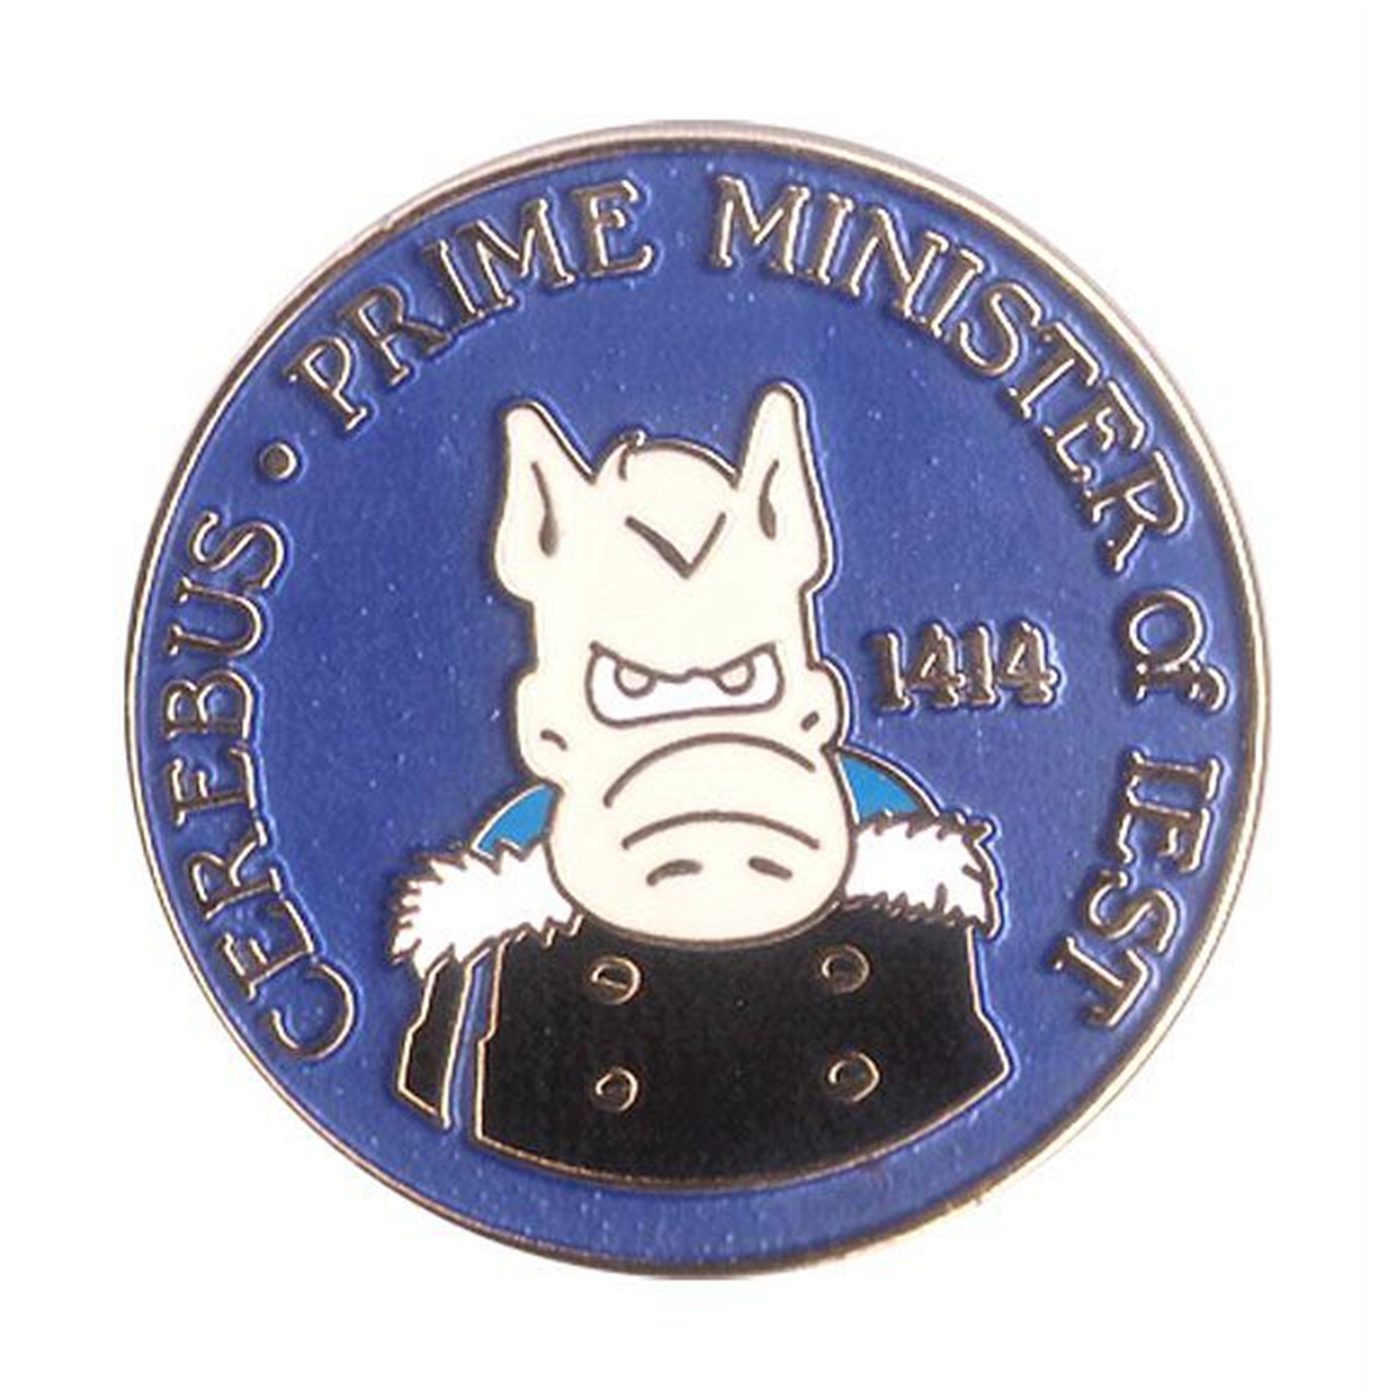 Cerebus Prime Minister of Iest Pin